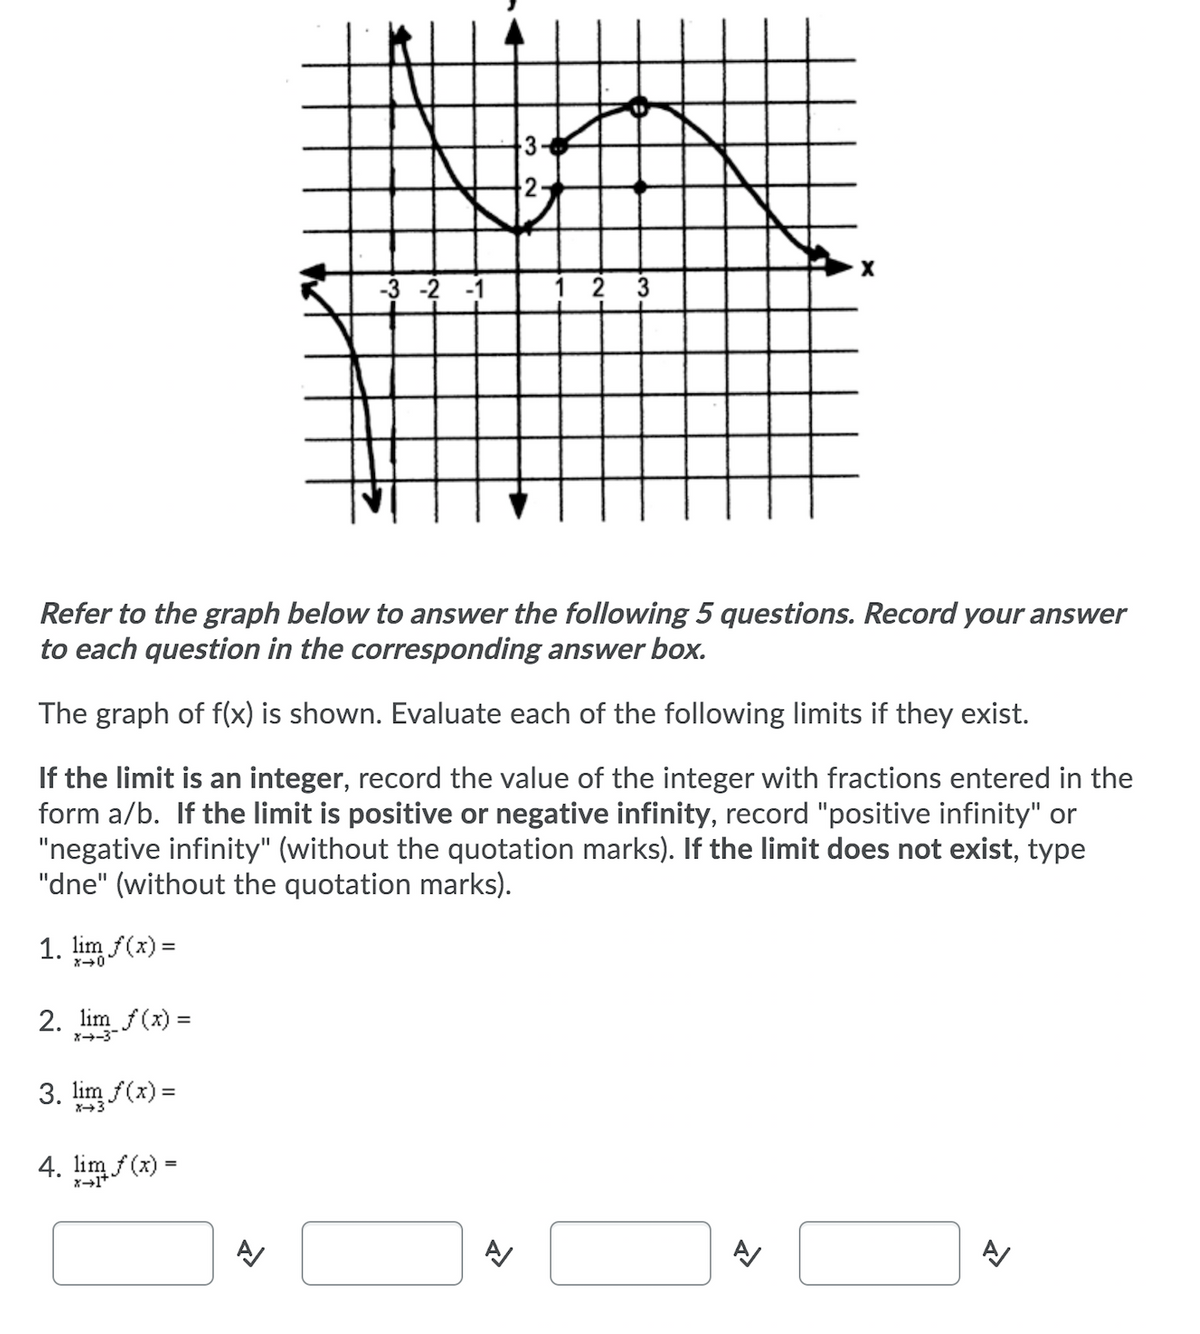 3
2-
-3 -2 -1
1 2 3
Refer to the graph below to answer the following 5 questions. Record your answer
to each question in the corresponding answer box.
The graph of f(x) is shown. Evaluate each of the following limits if they exist.
If the limit is an integer, record the value of the integer with fractions entered in the
form a/b. If the limit is positive or negative infinity, record "positive infinity" or
"negative infinity" (without the quotation marks). If the limit does not exist, type
"dne" (without the quotation marks).
1. lim f(x) =
%3D
2. lim f(x) =
X-3
3. lim f(x) =
X3
4. lim f (x) =
